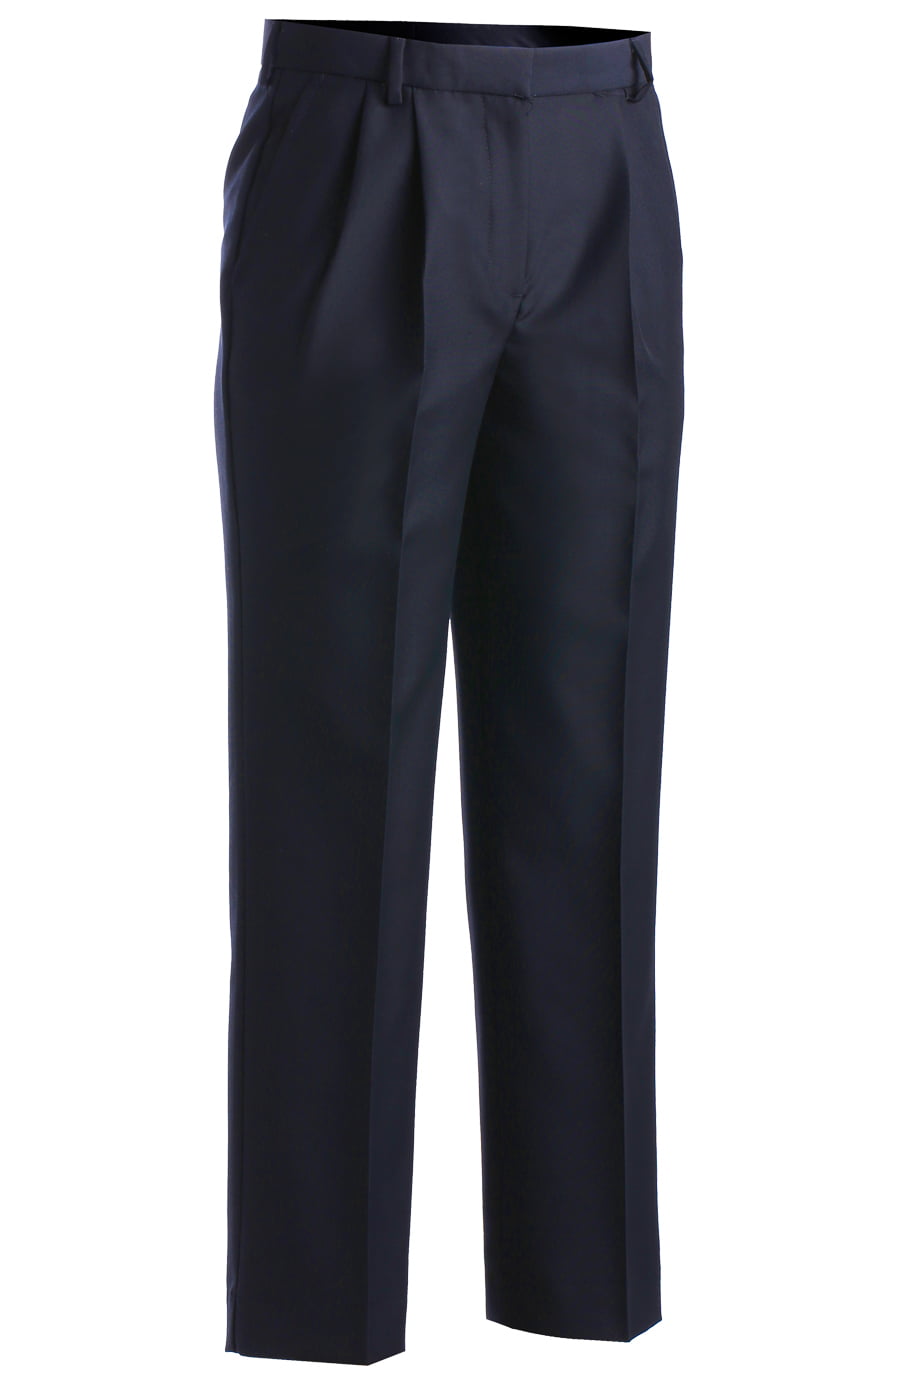 Edwards Women's Pleated Front Pants